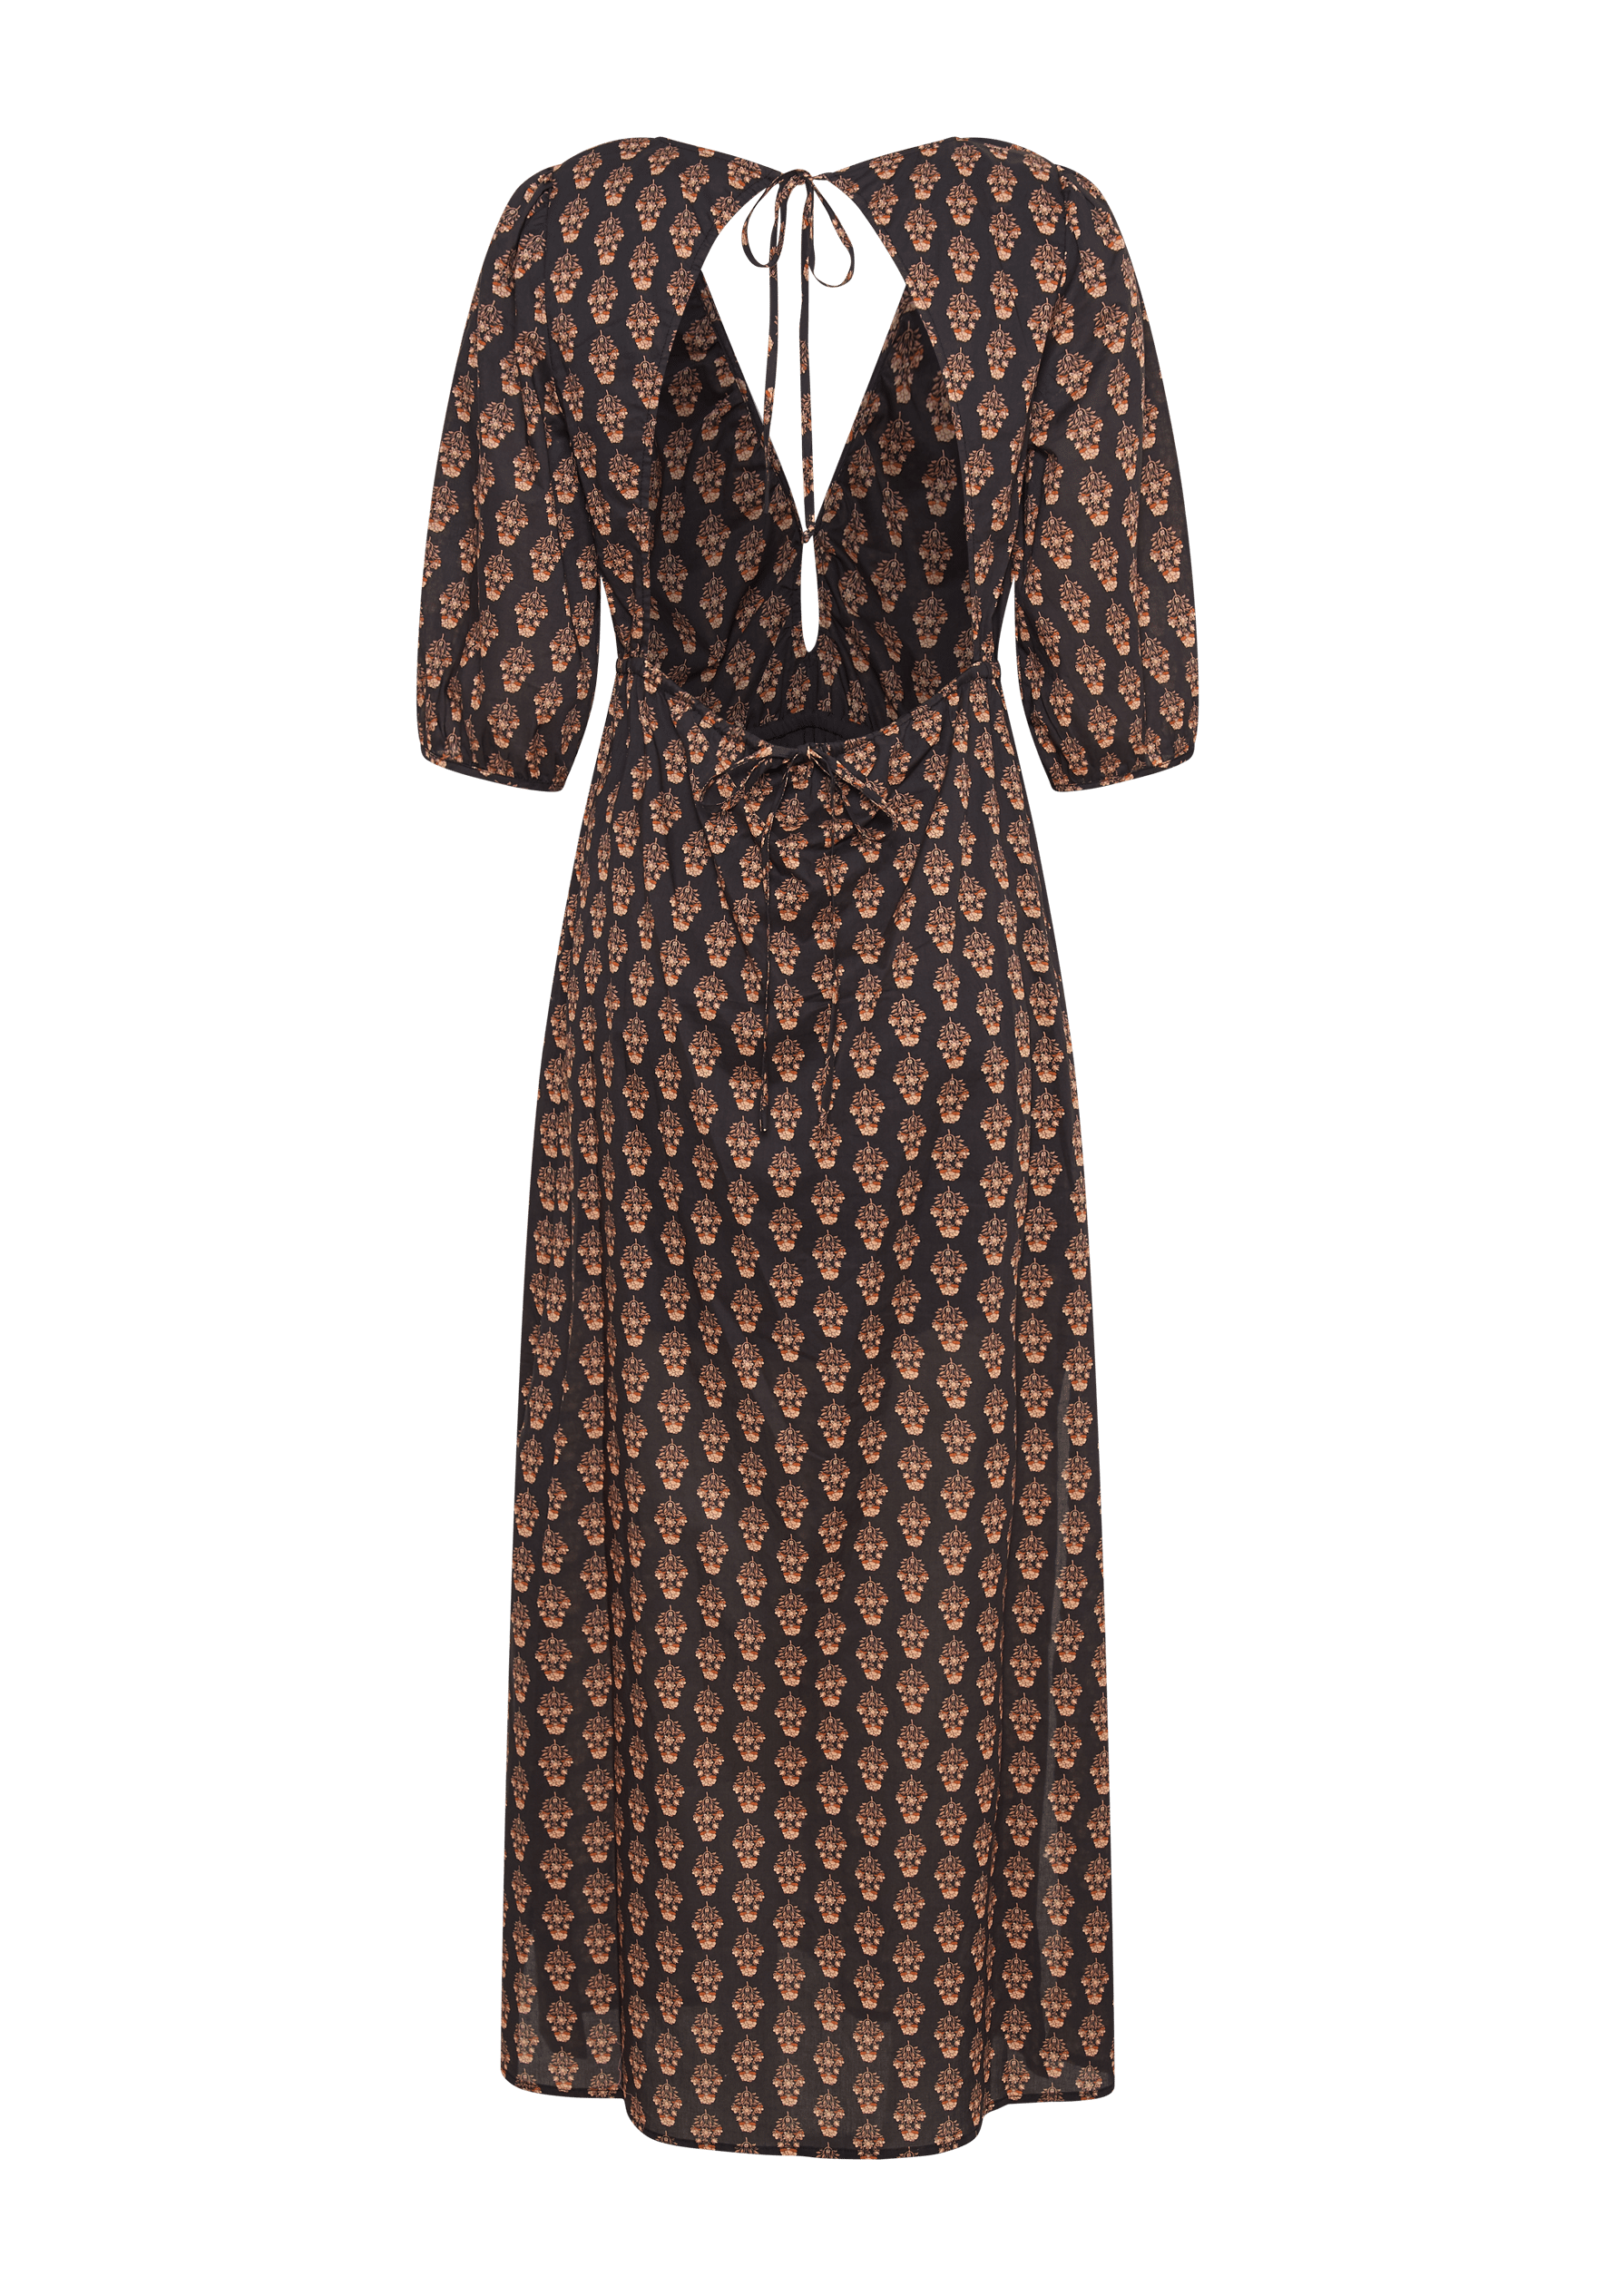 Ariah Lee Maxi Dress | Auguste The Label - Auguste The Label International